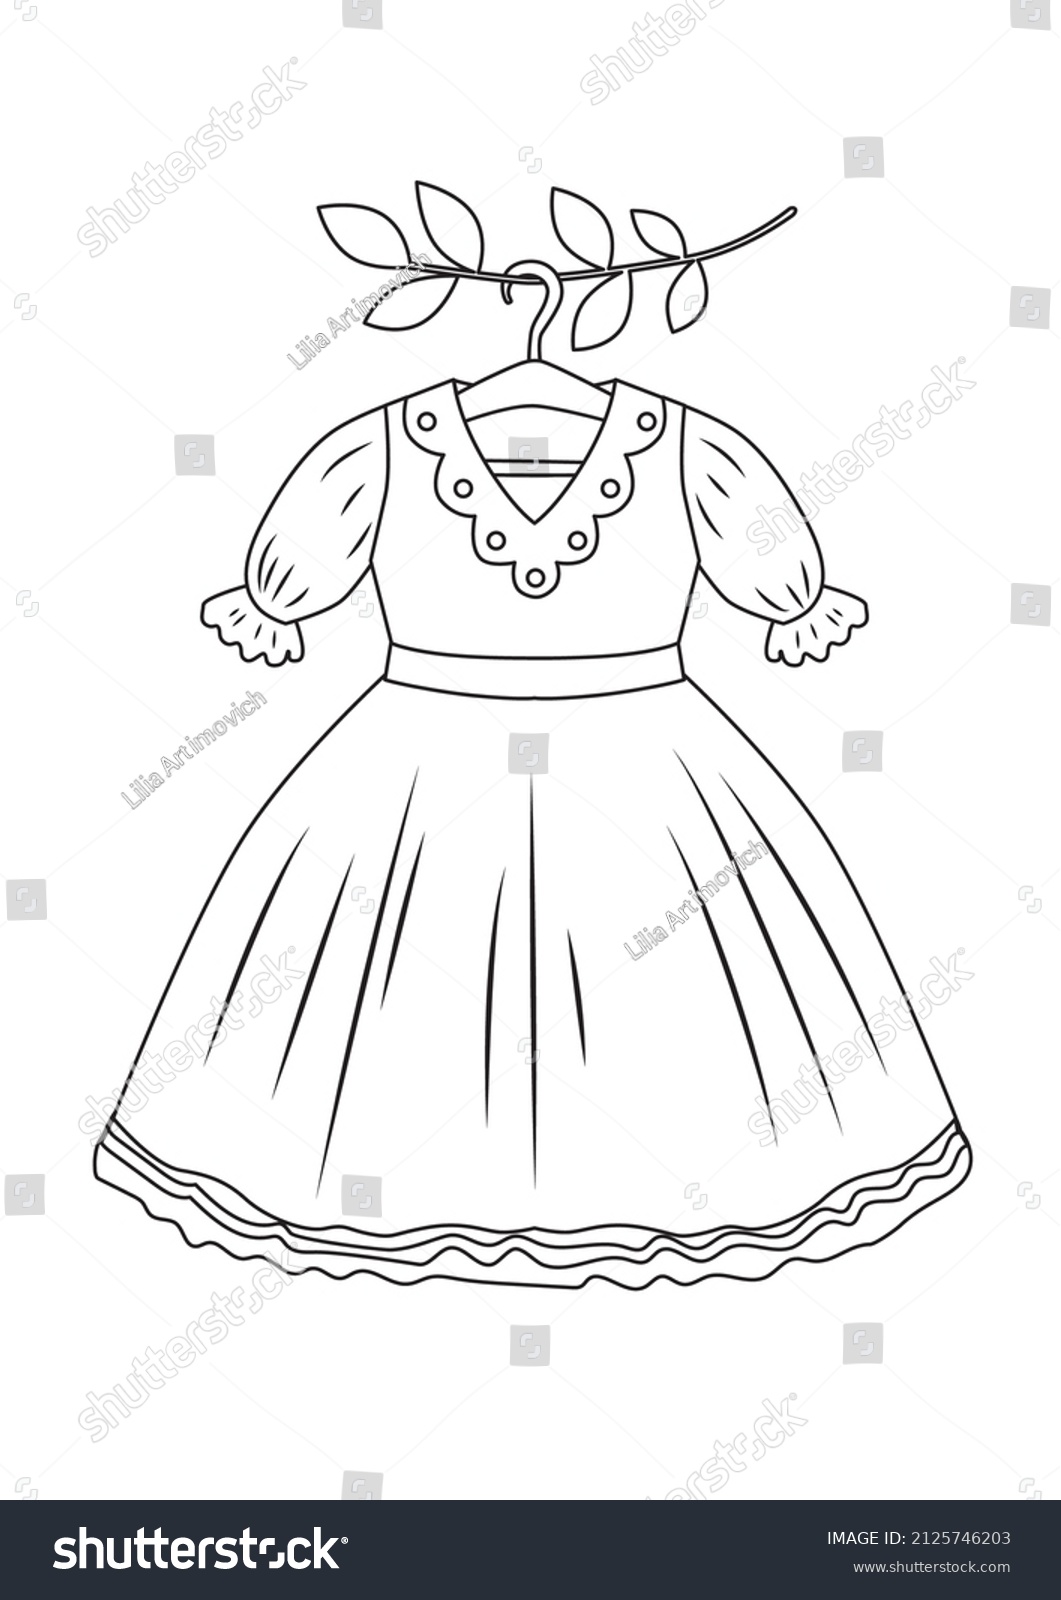 Coloring Page Princess Dress Outline Cartoon Stock Vector (Royalty Free ...